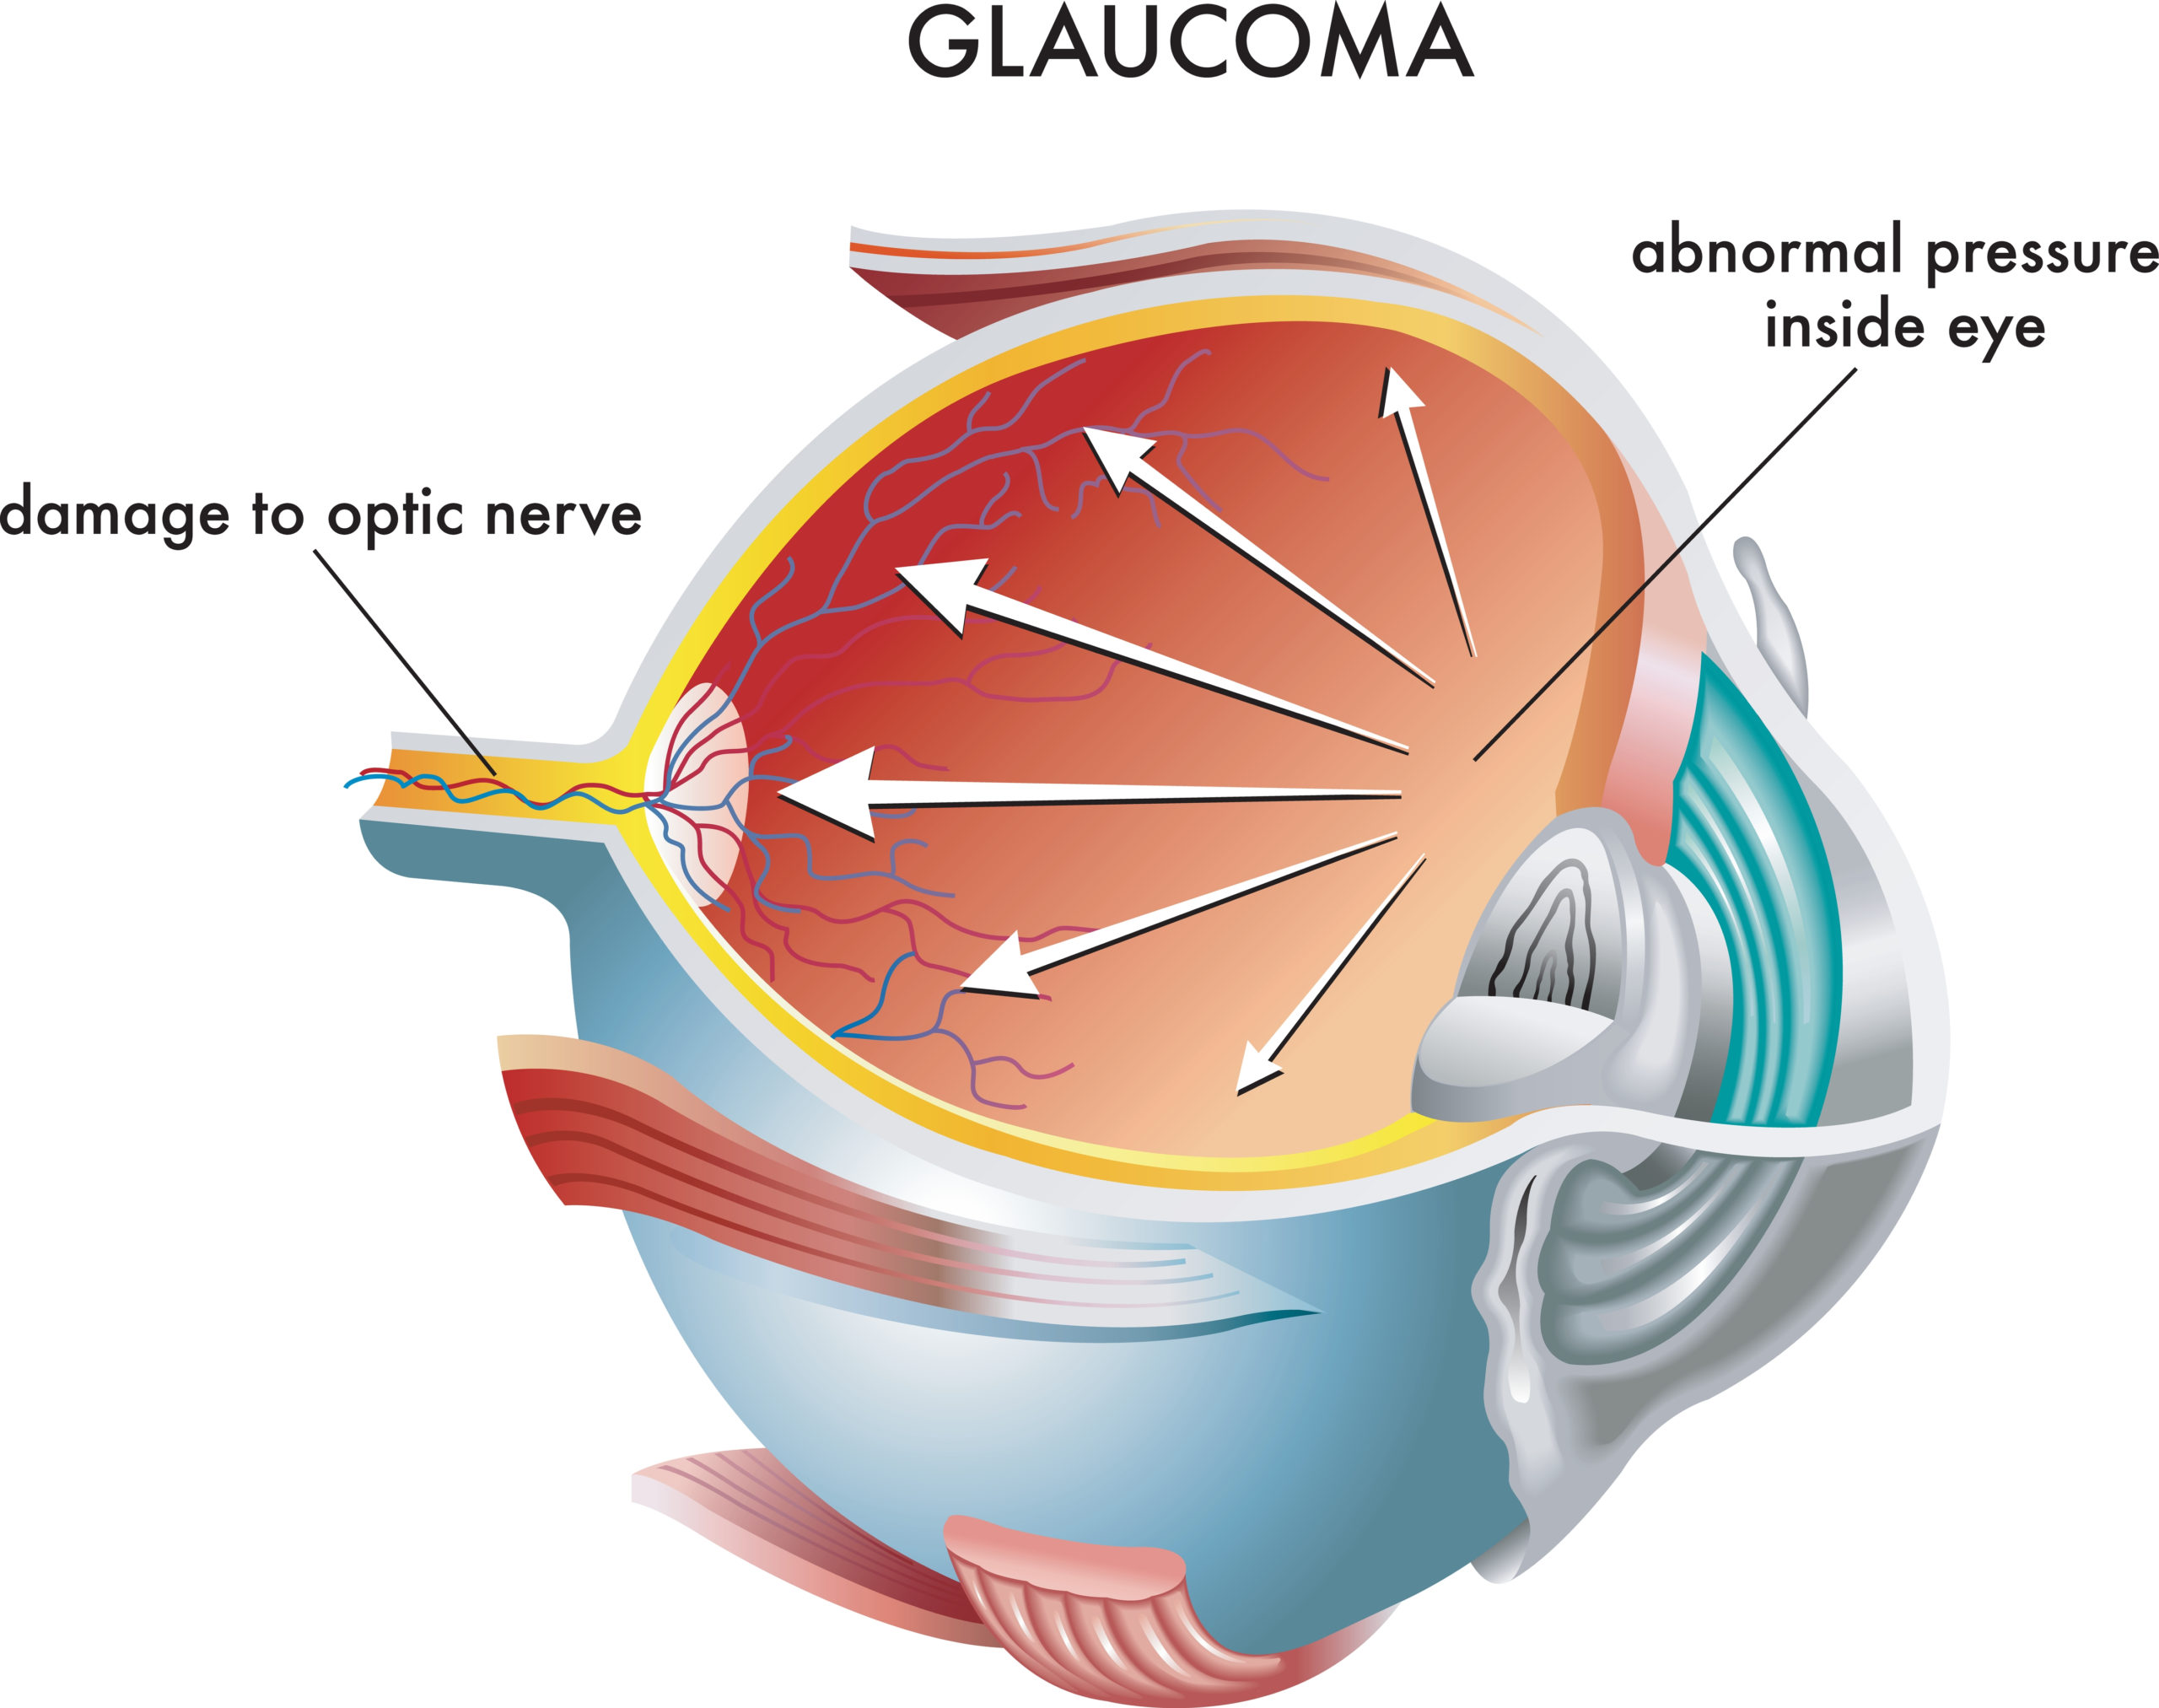 Intraocular Pressure And Retinal Nerve Fiber Layer Thinning In Glaucoma